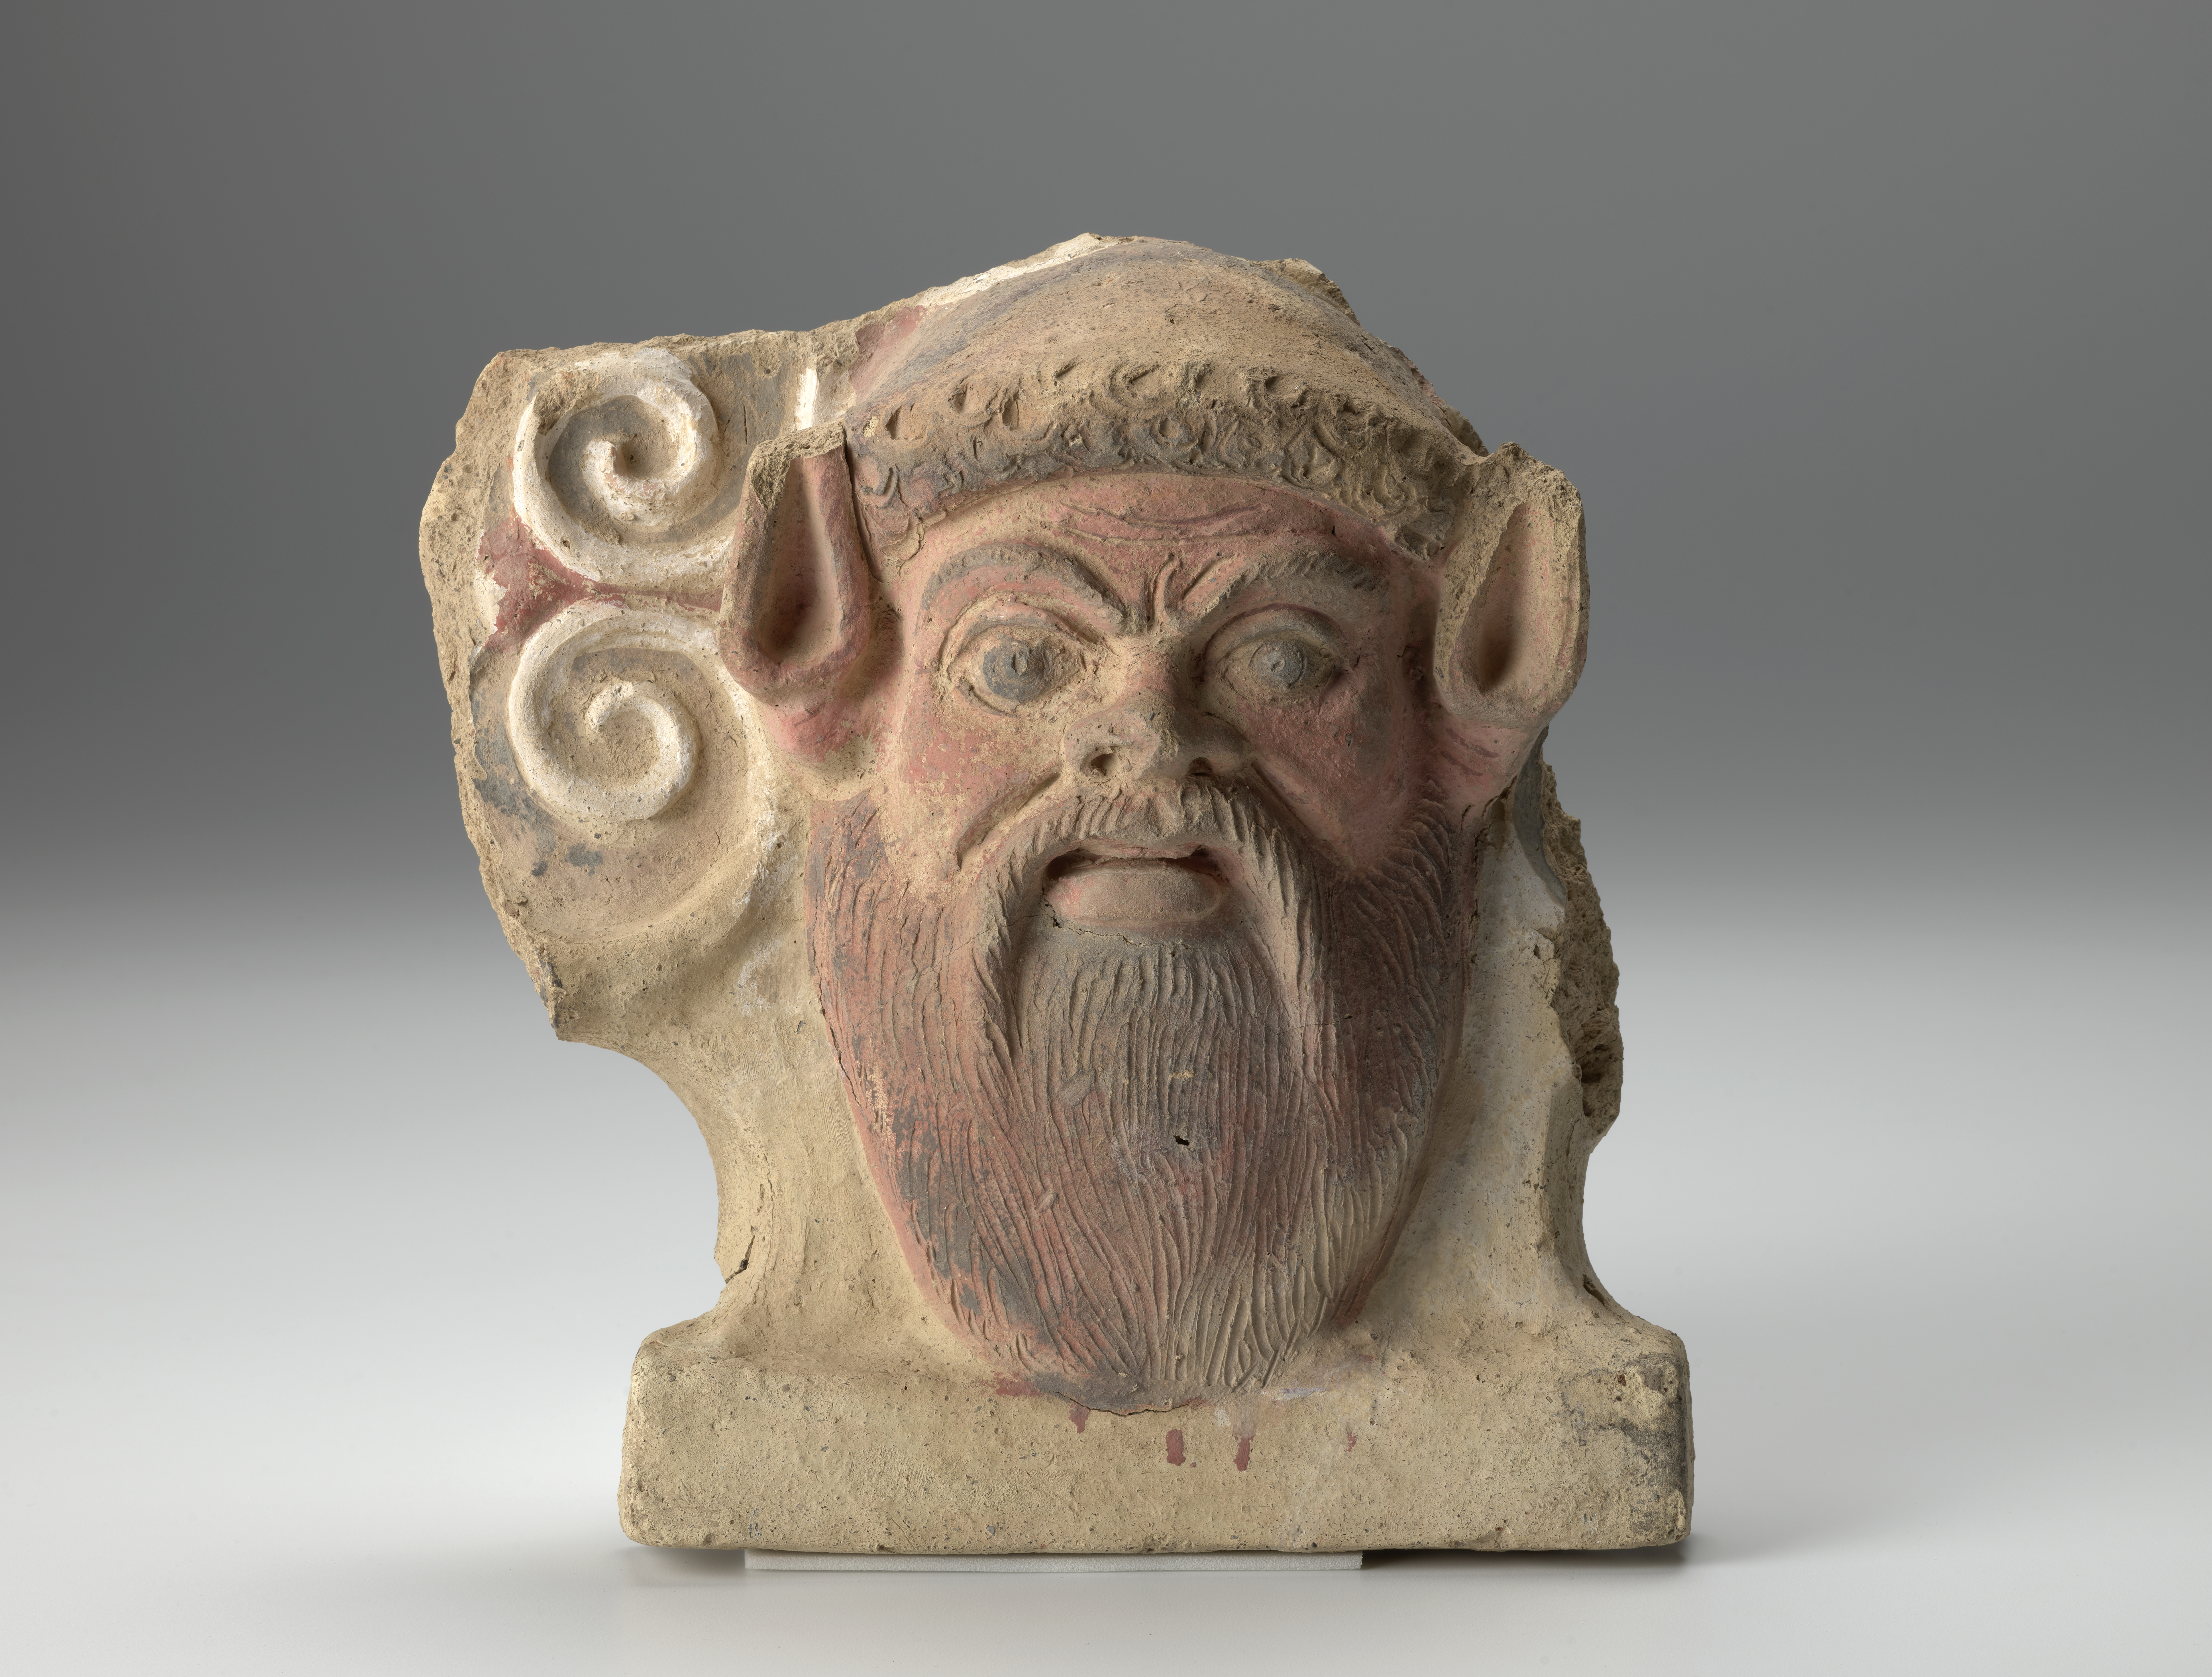 A terracotta sculpture of the head of a bearded man, with a spiral design on one side.